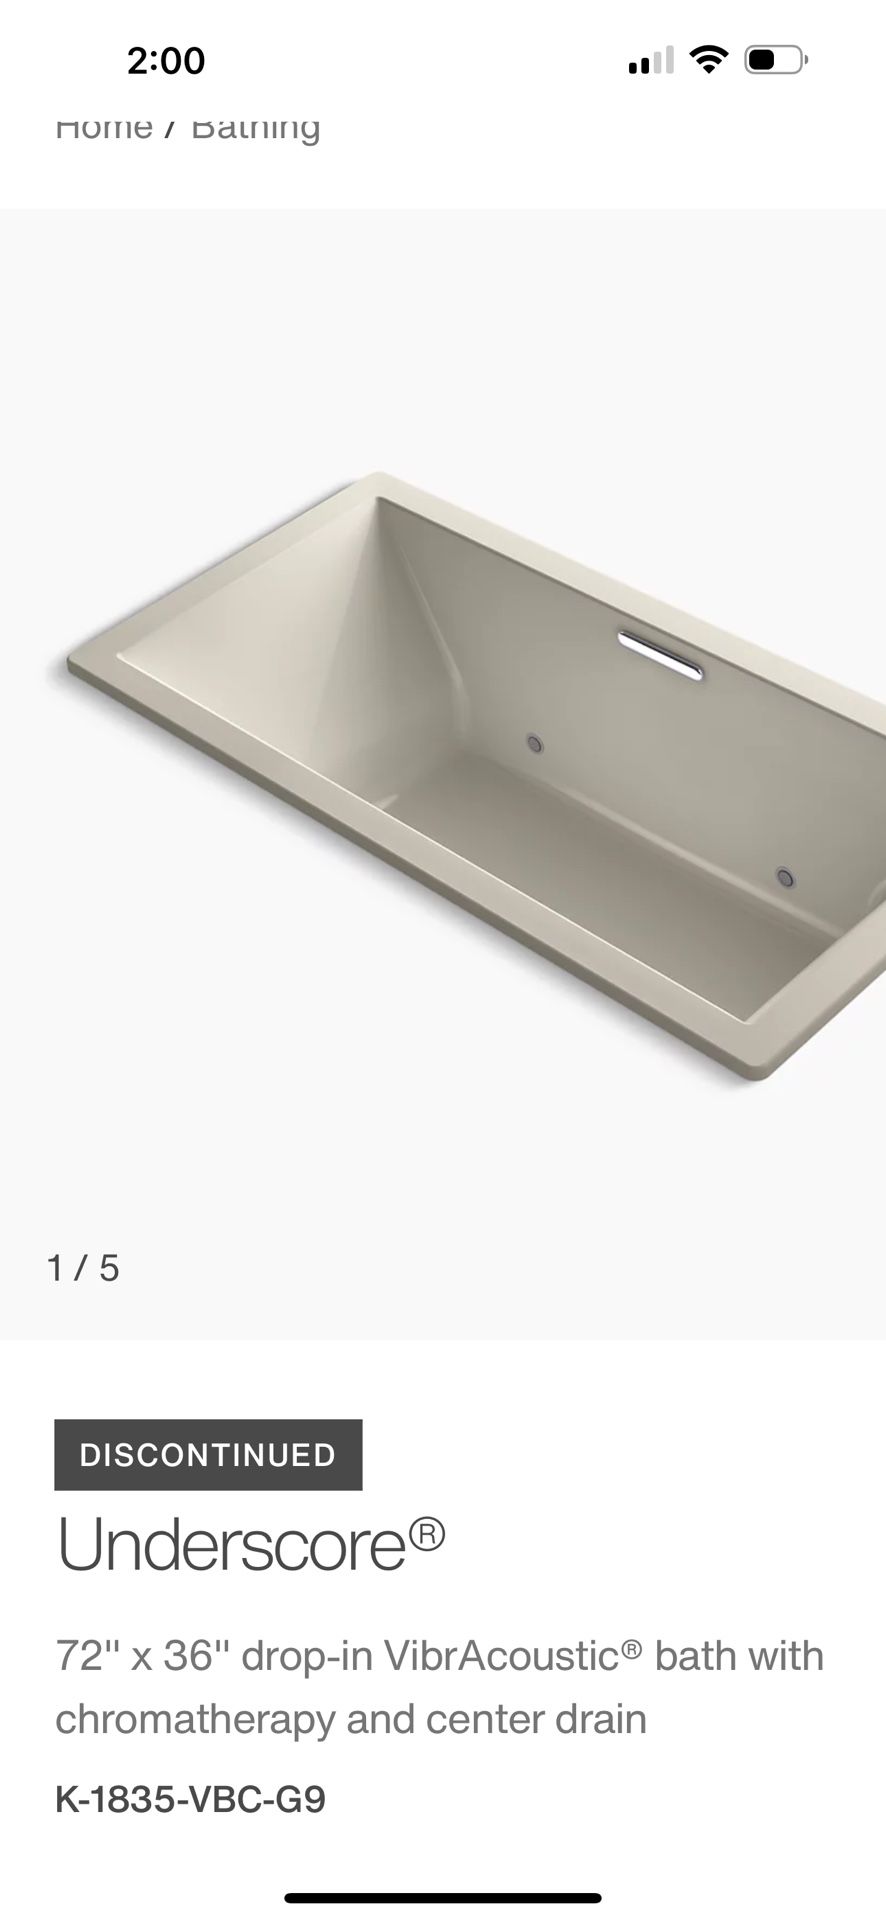 Kohler Underscore® 72" x 36" drop-in VibrAcoustic® bath with chromatherapy and center drain K-1835-VBC-G9 New in box 